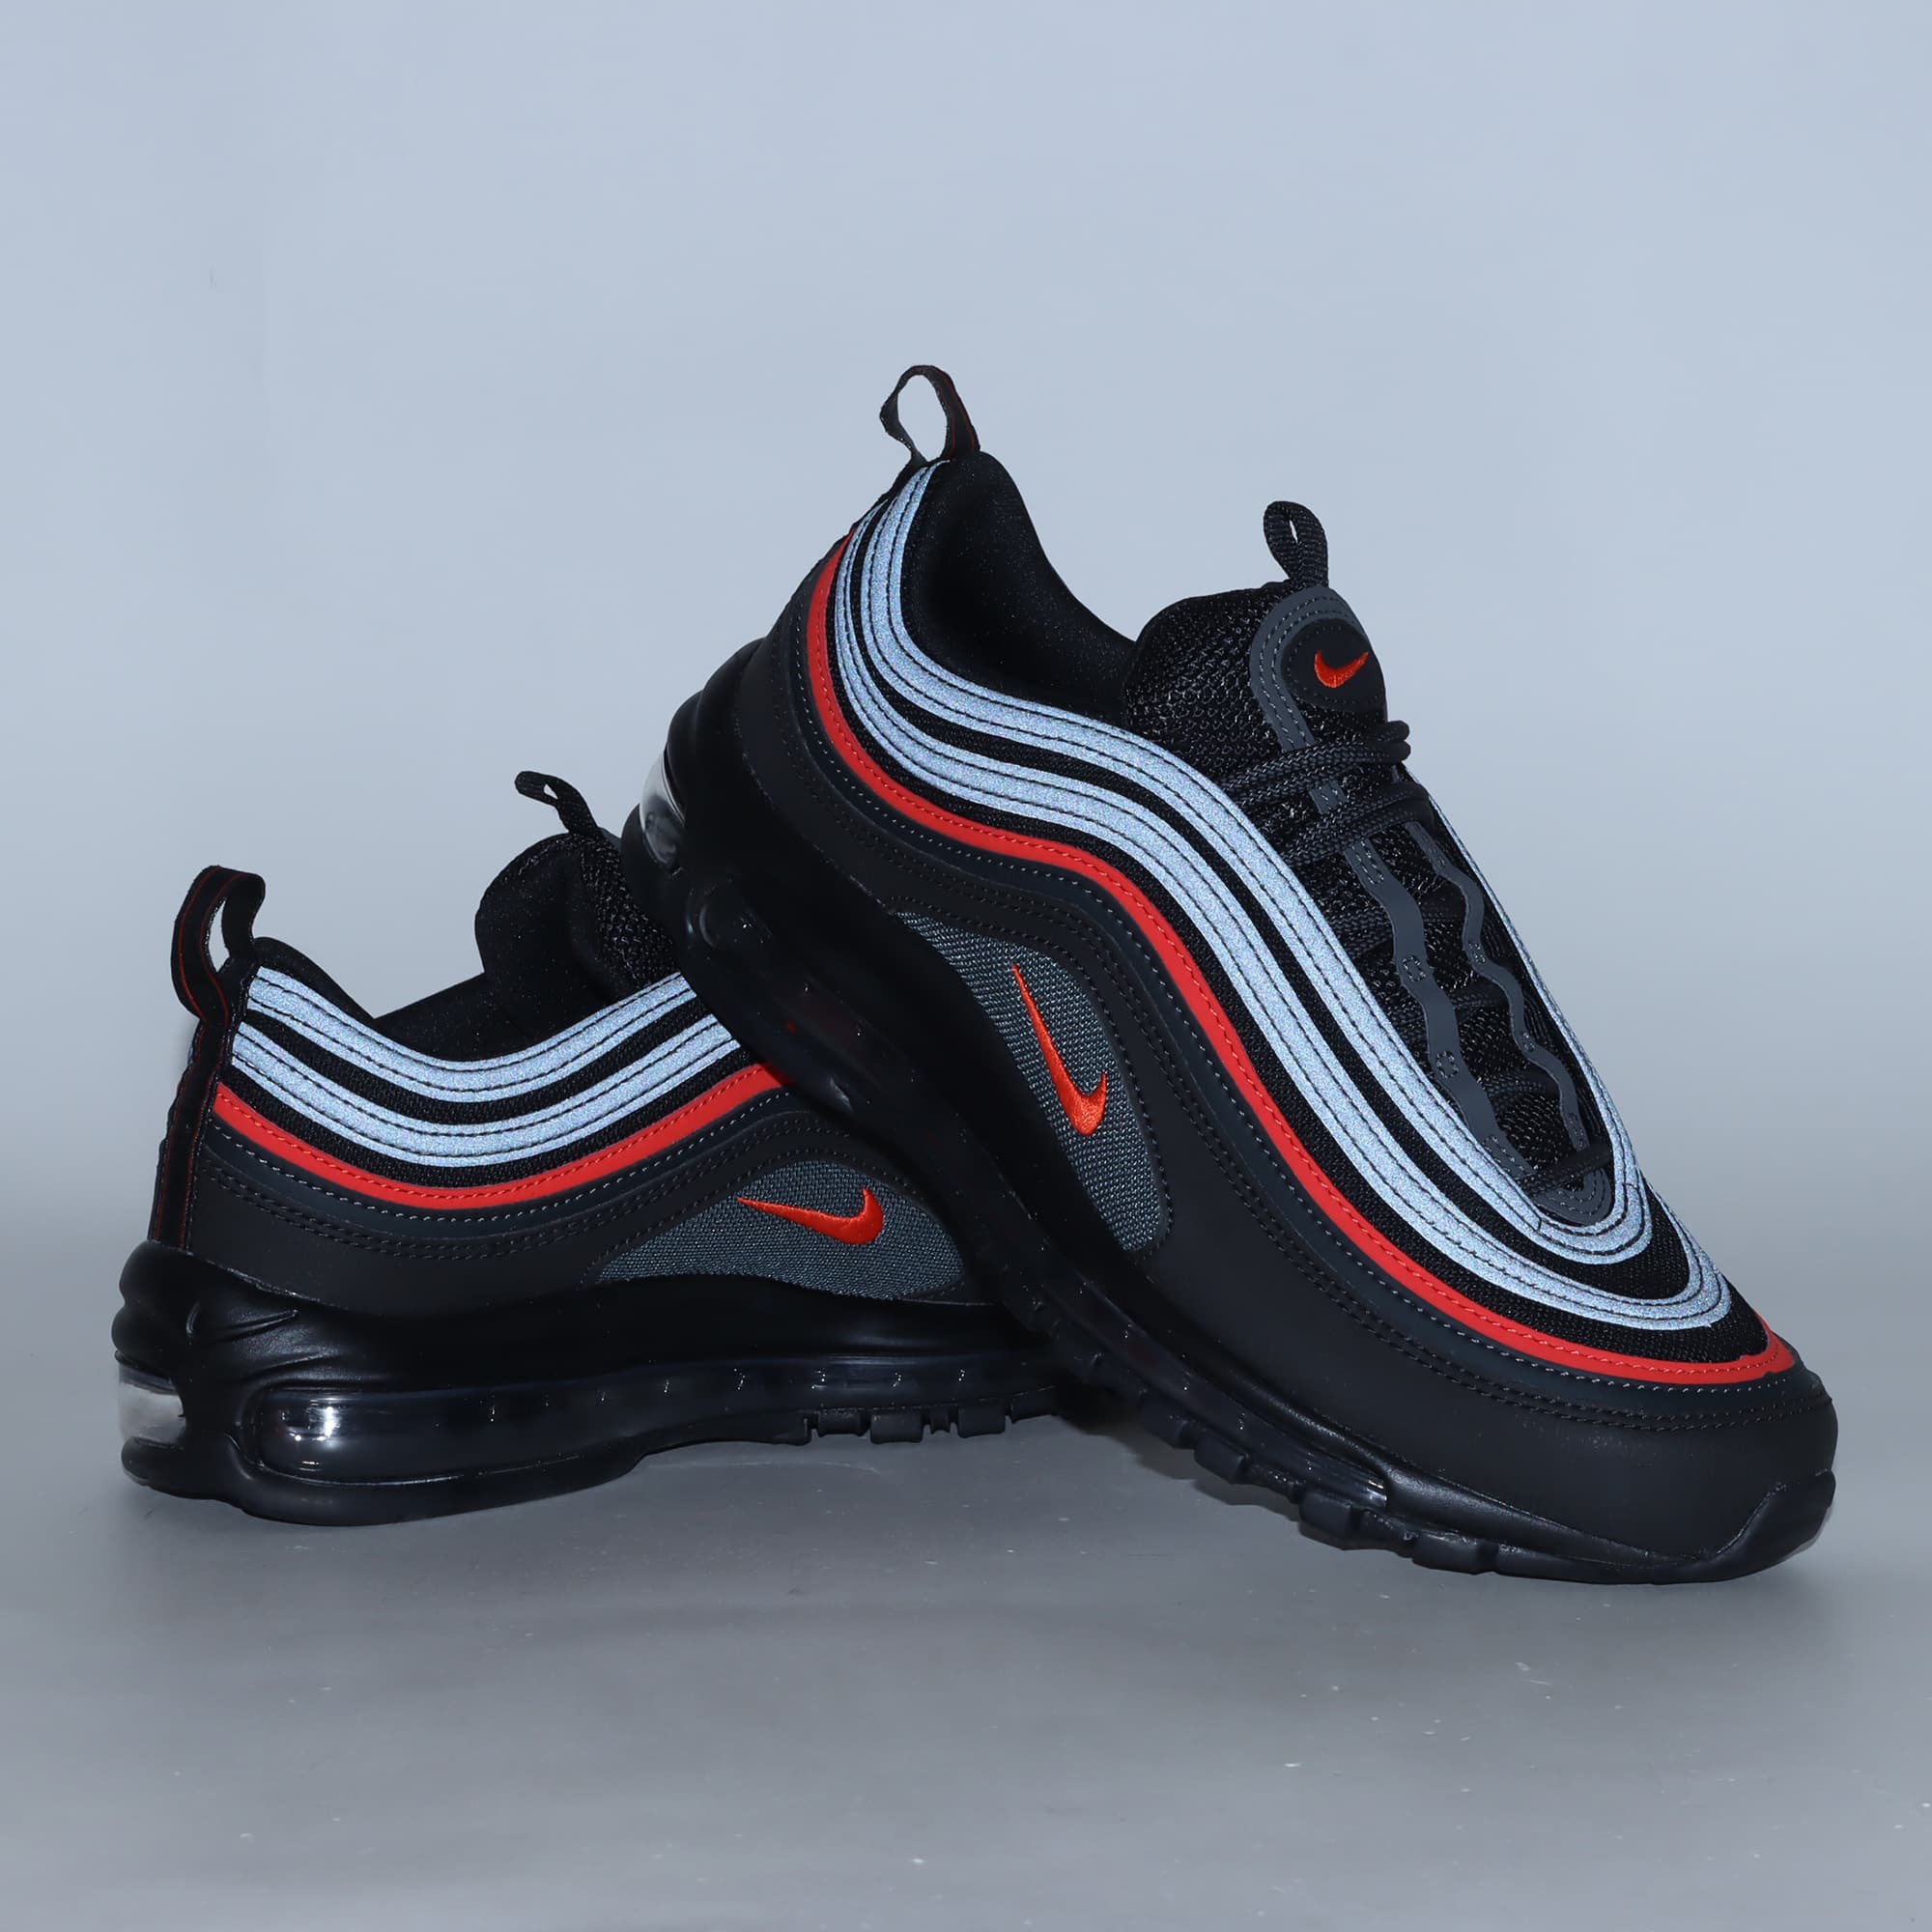 NIKE AIR MAX 97 BLACK/PICANTE RED-ANTHRACITE